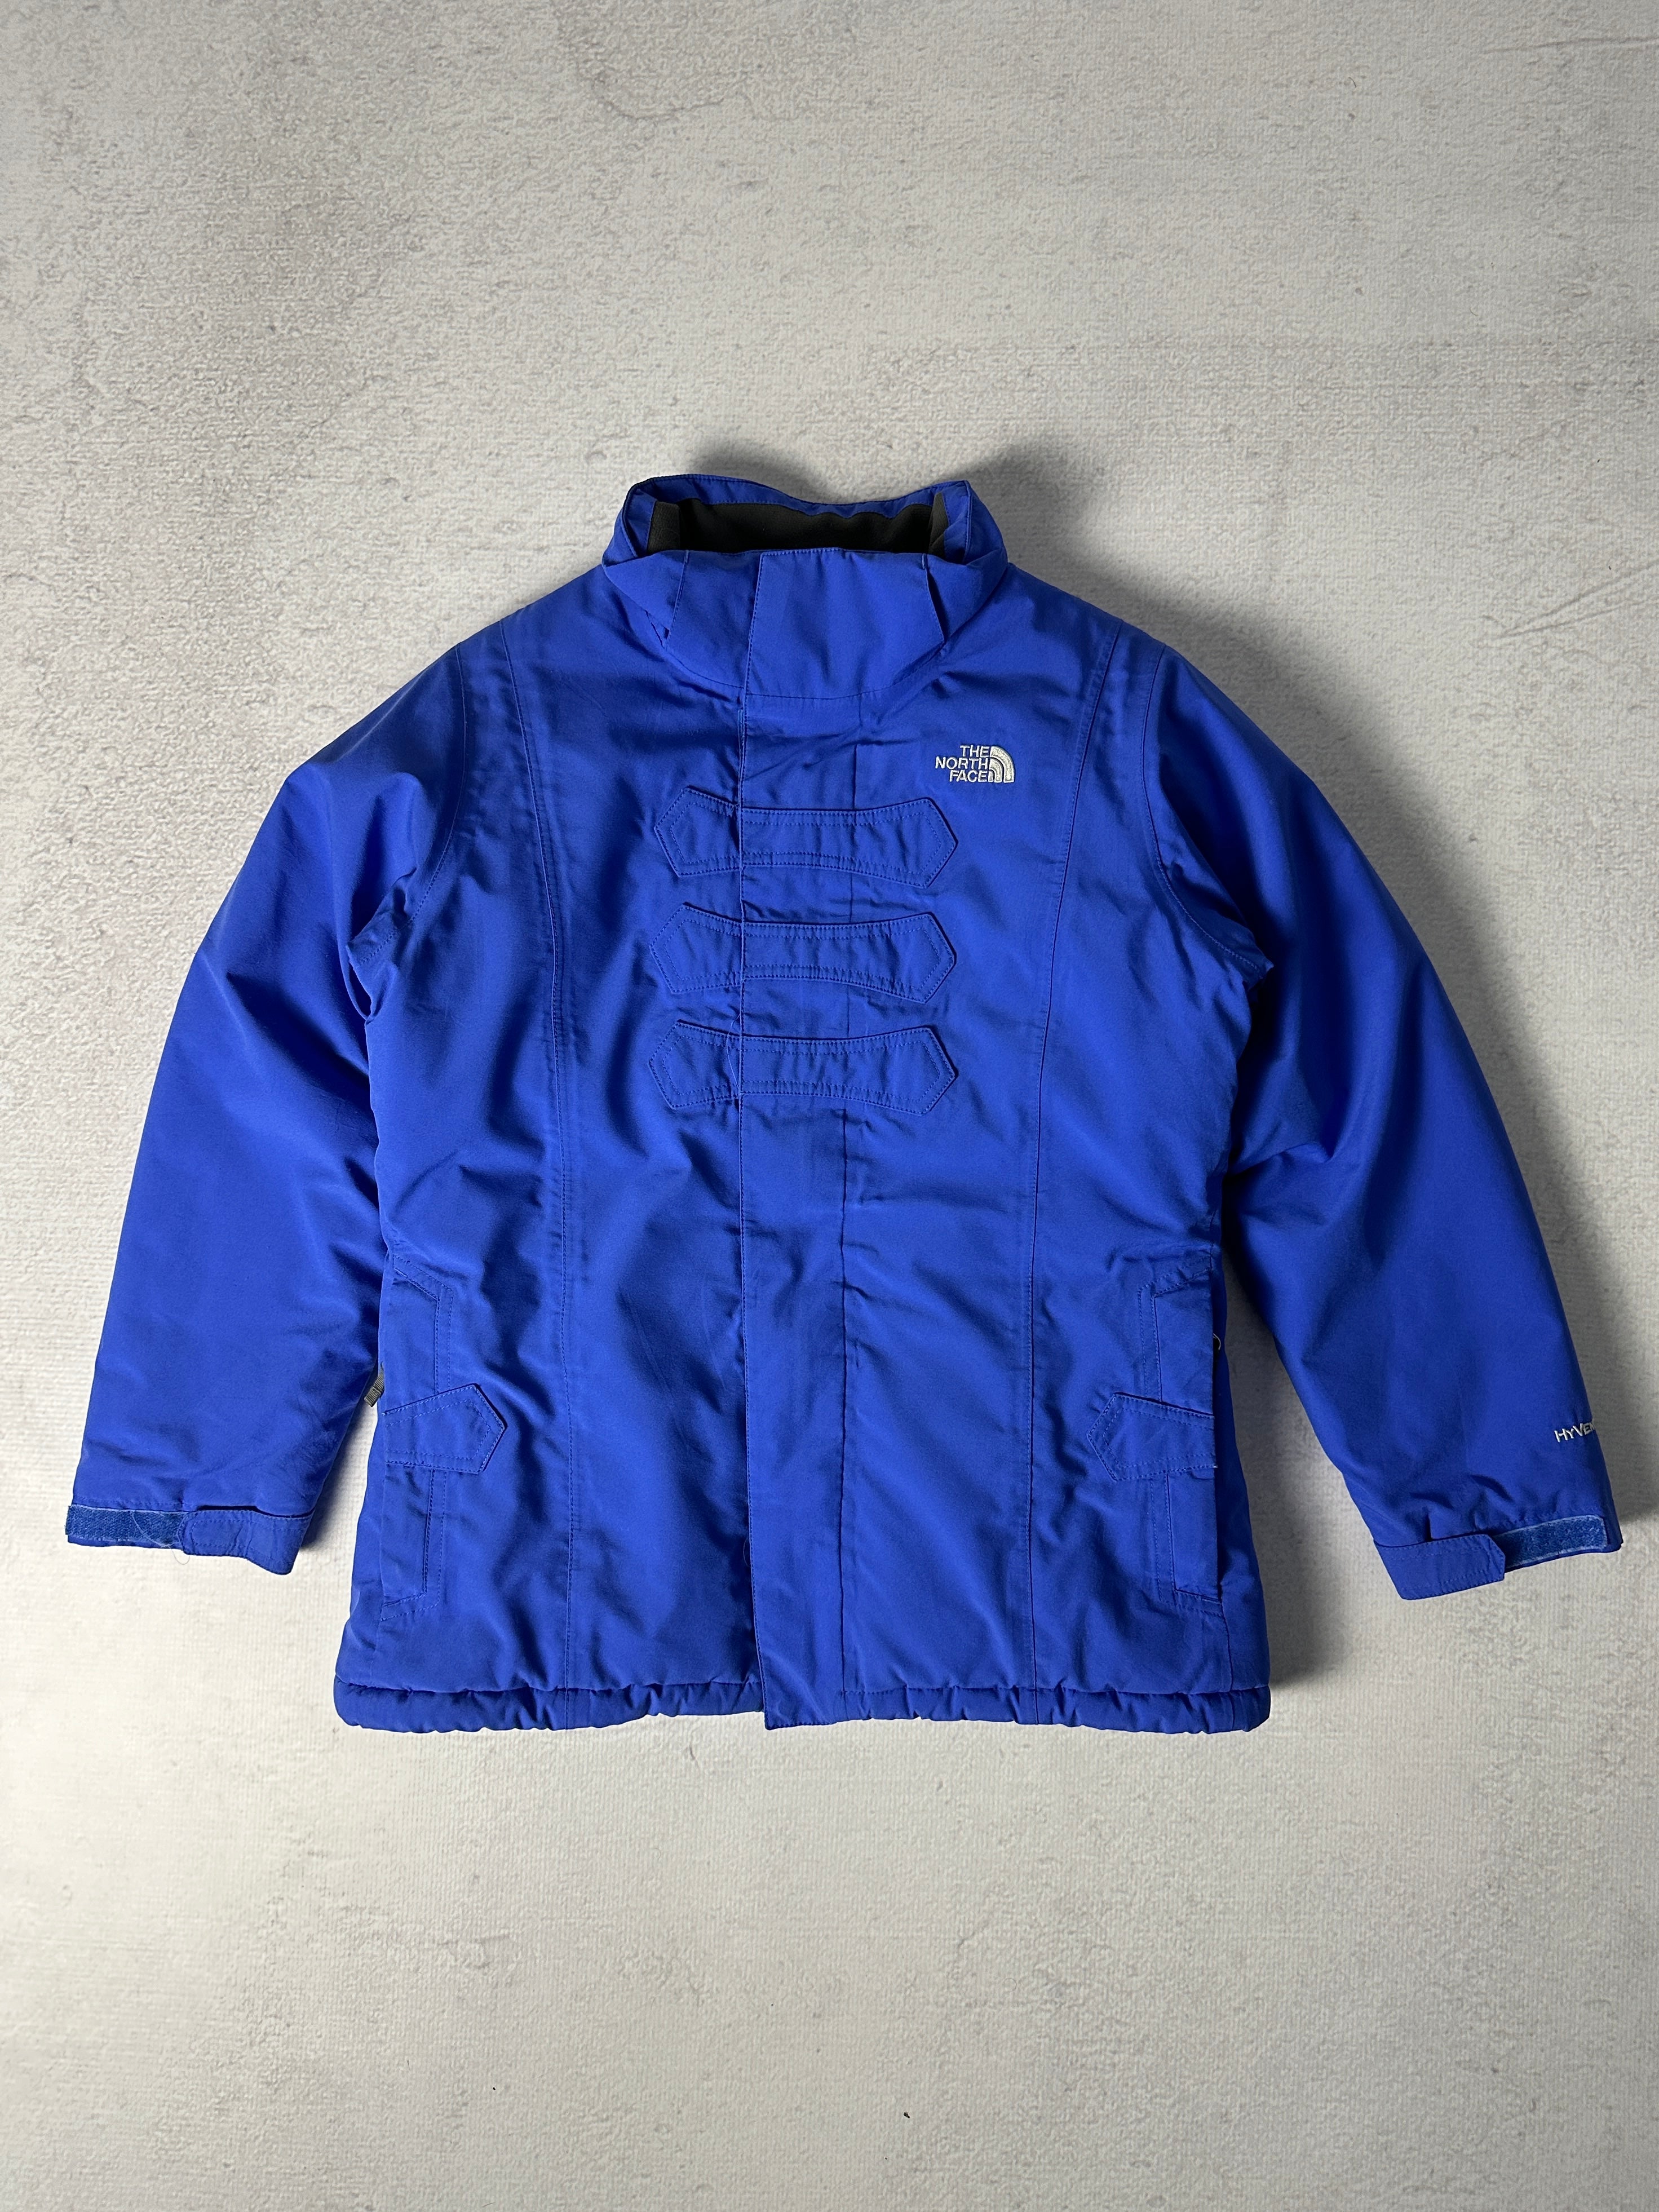 Vintage The North Face Insulated Jacket - Women's XL